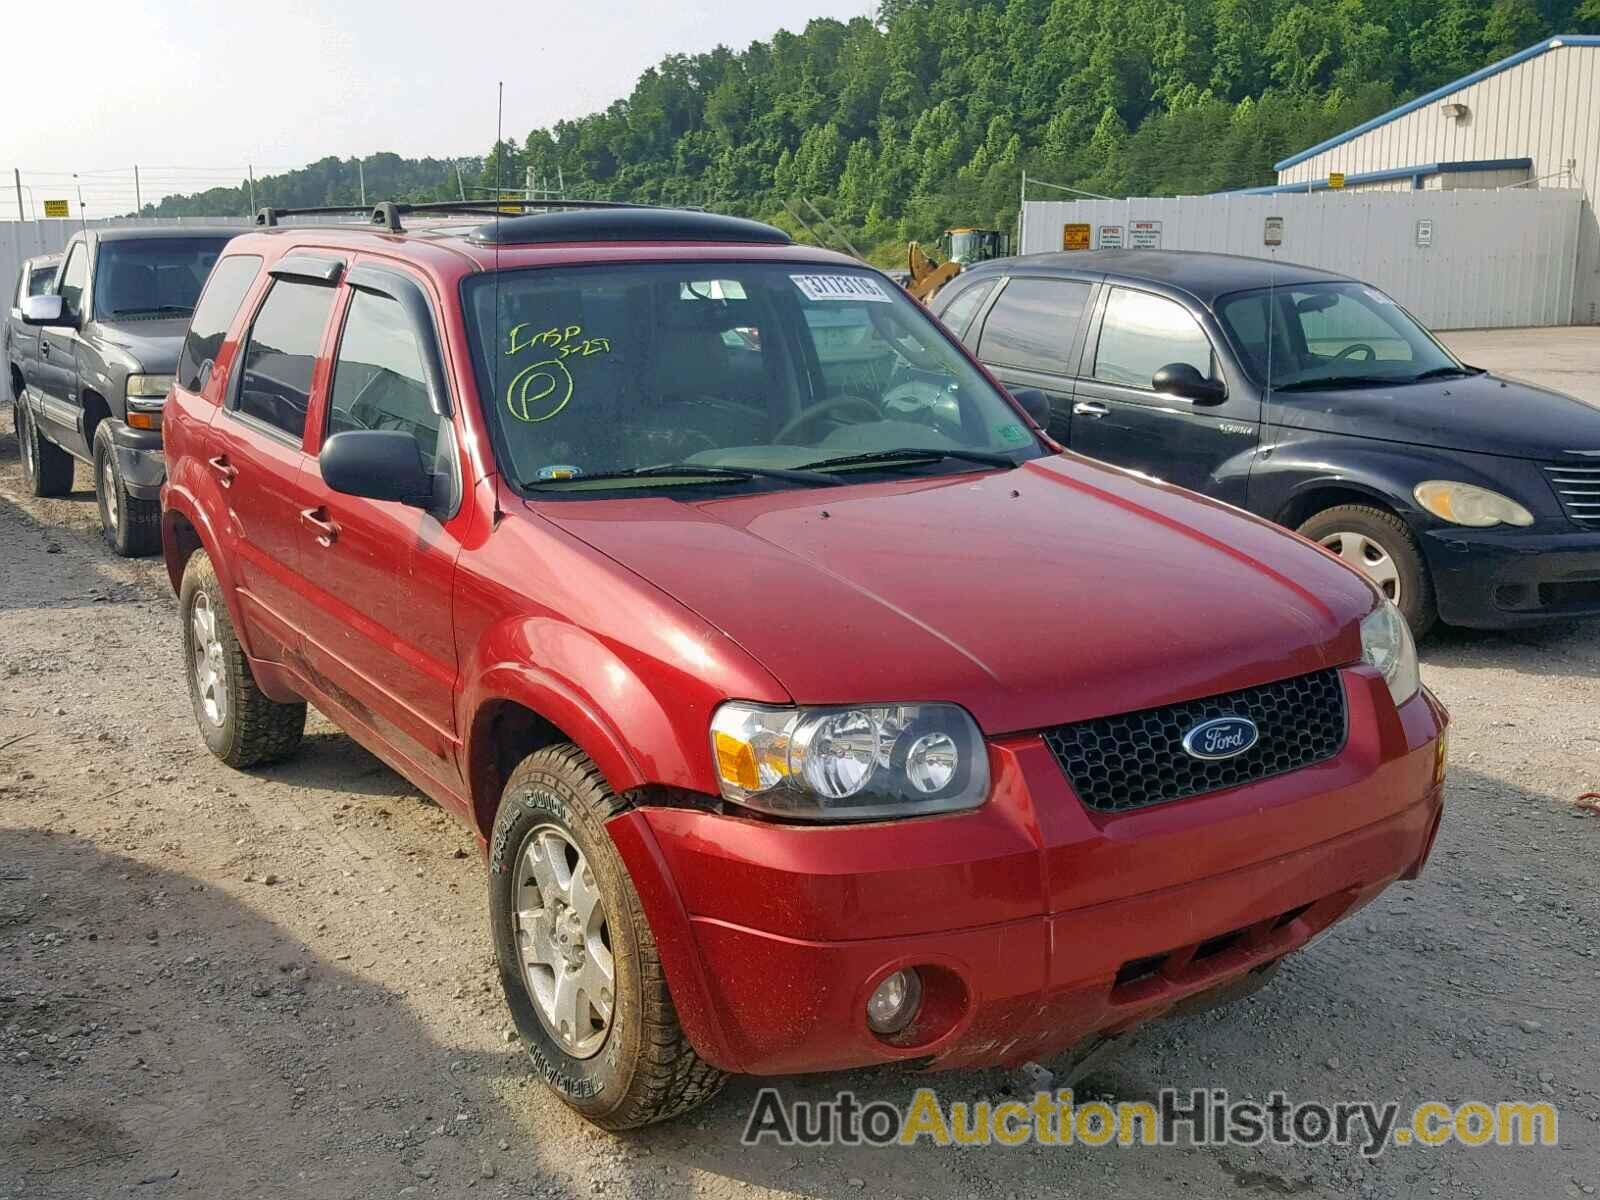 2006 FORD ESCAPE LIMITED, 1FMCU94156KC13446